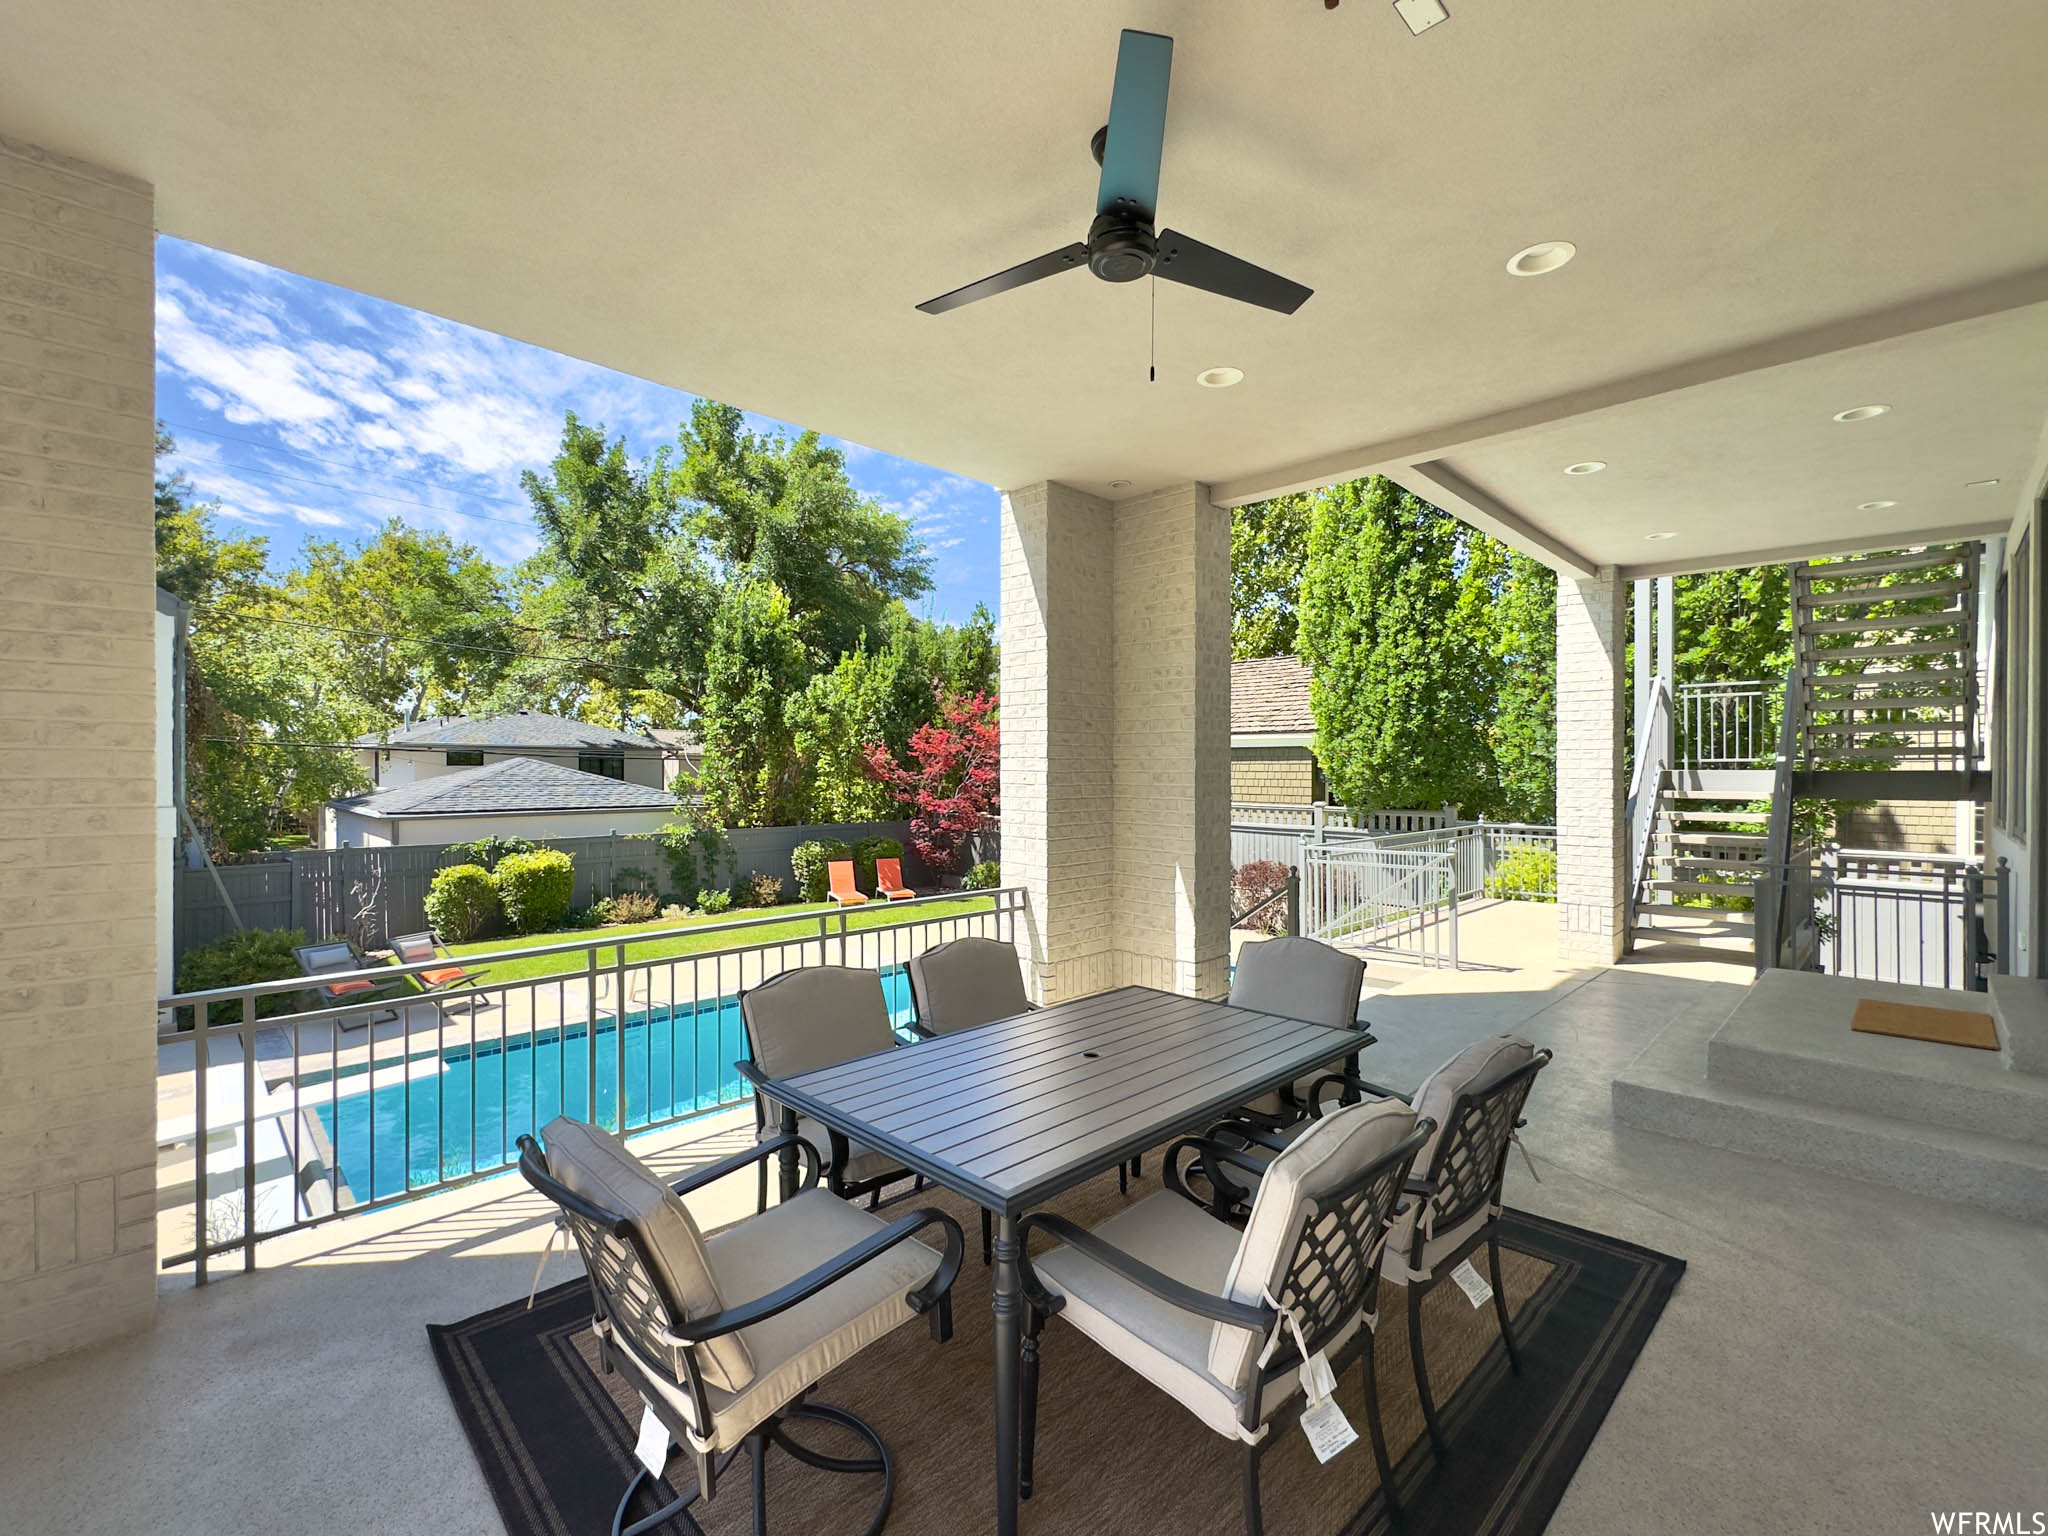 View of patio / terrace featuring pool and ceiling fan